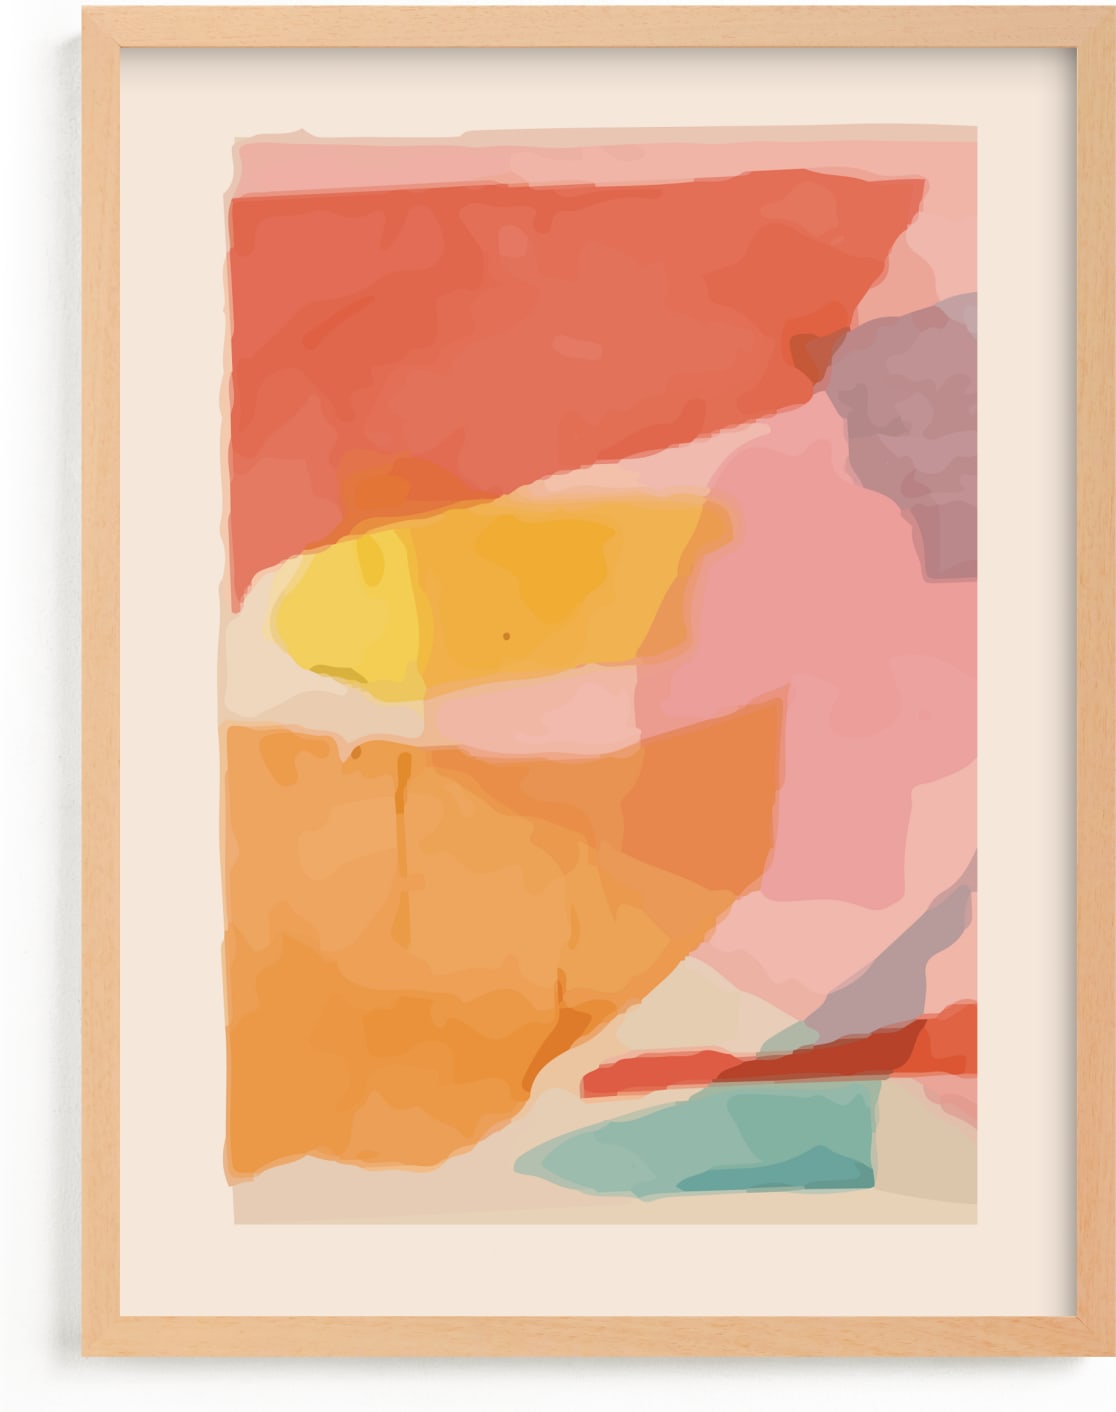 This is a yellow, pink, orange art by Stefania Copertini called TISSUES I.